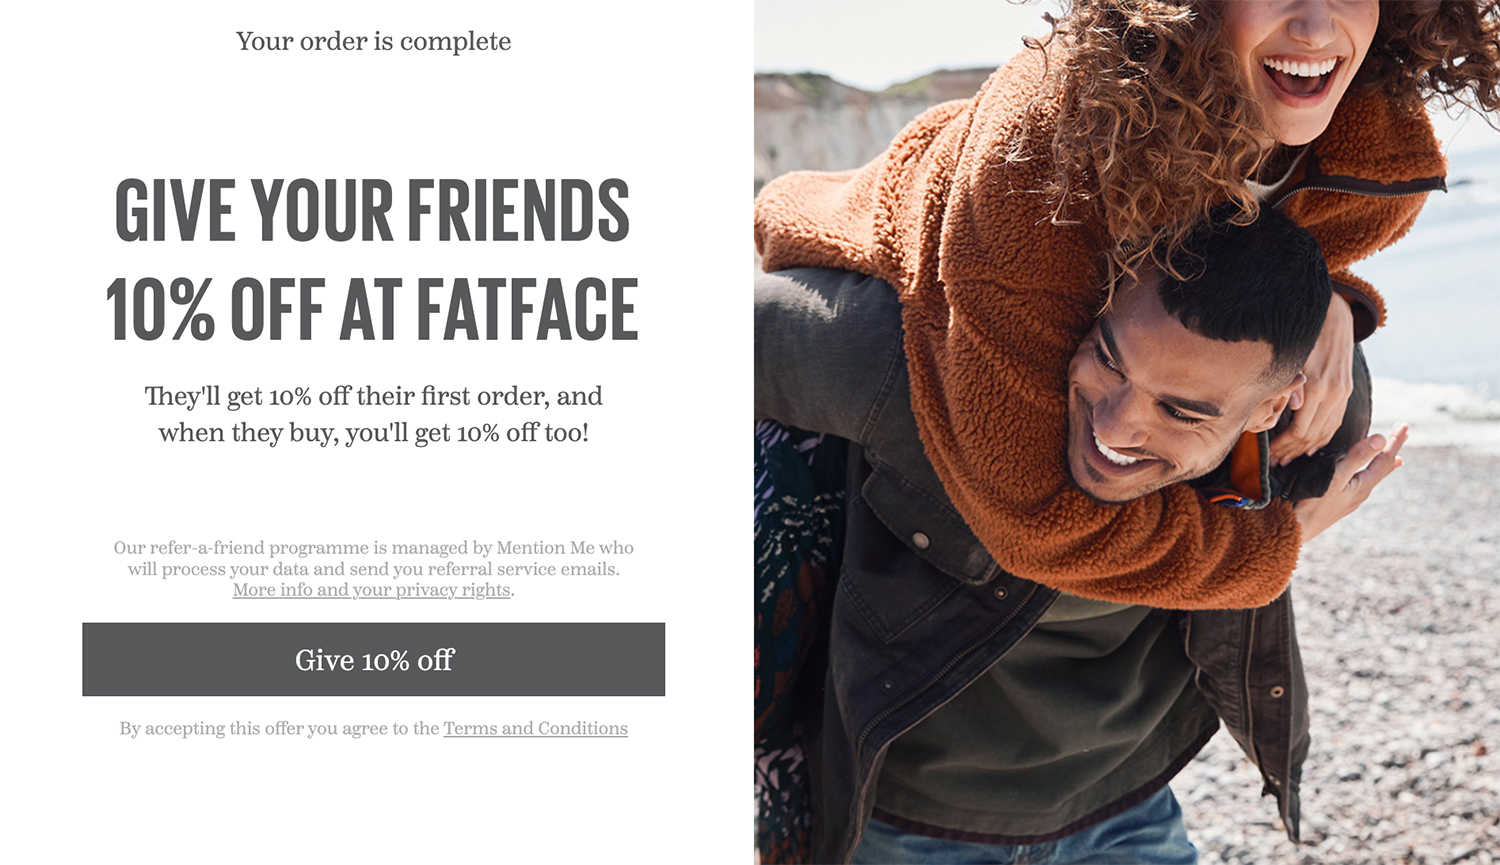 Fatface refer-a-friend example